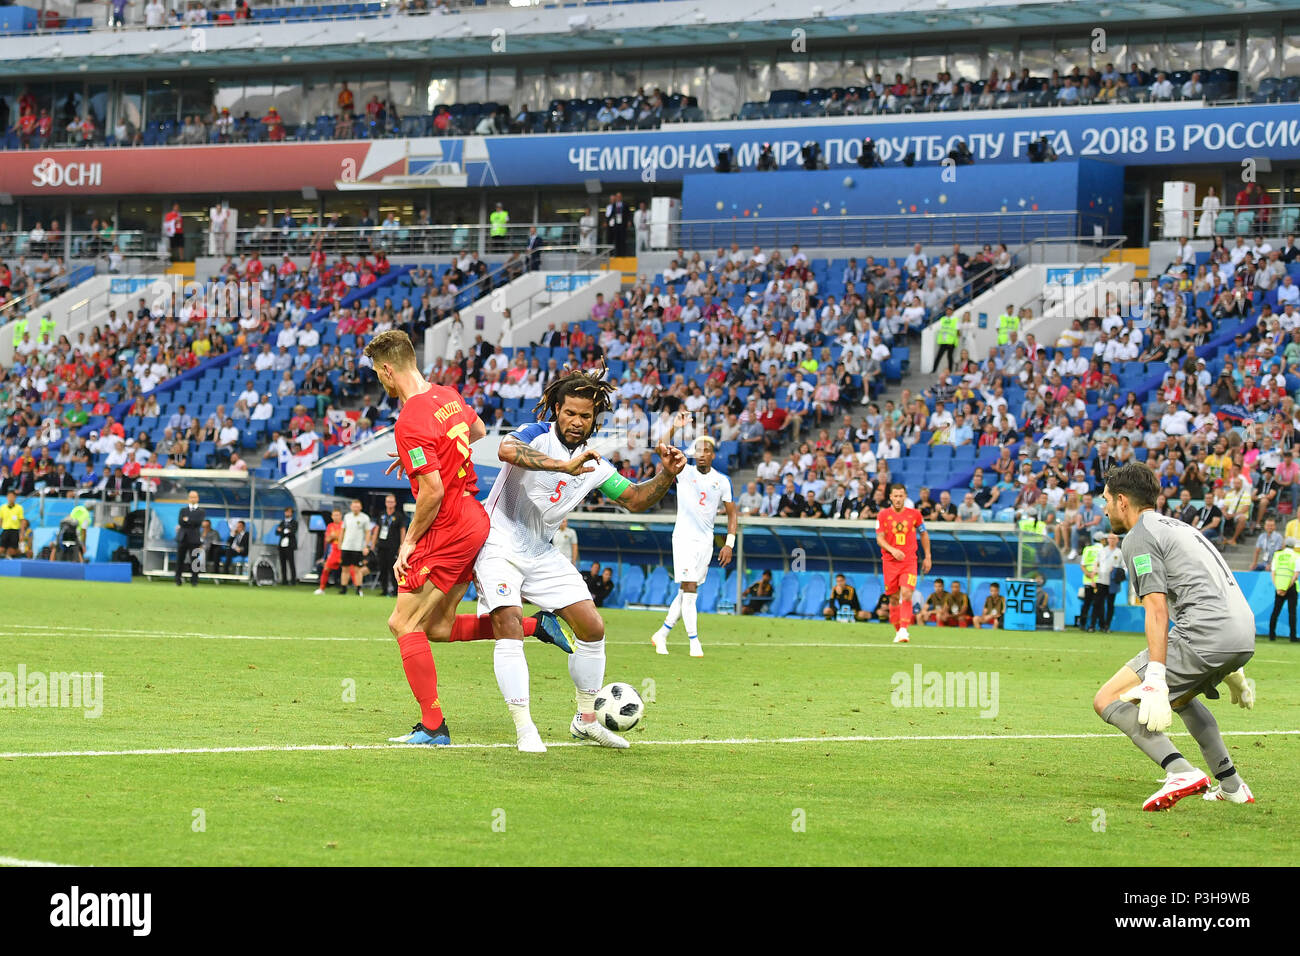 Sochi, Russland. 18th June, 2018. Thomas MEUNIER (BEL) tries to score with the hoe. Action, duels versus Roman TORRES (PAN), re: goalkeeper Jaime PENEDO (PAN). Box scene backheel. Belgium (BEL) - Panama (PAN) 3-0, Preliminary Round, Group G, Game 13, on 18.06.2018 in SOCHI, Fisht Olymipic Stadium. Football World Cup 2018 in Russia from 14.06. - 15.07.2018. | usage worldwide Credit: dpa/Alamy Live News Stock Photo